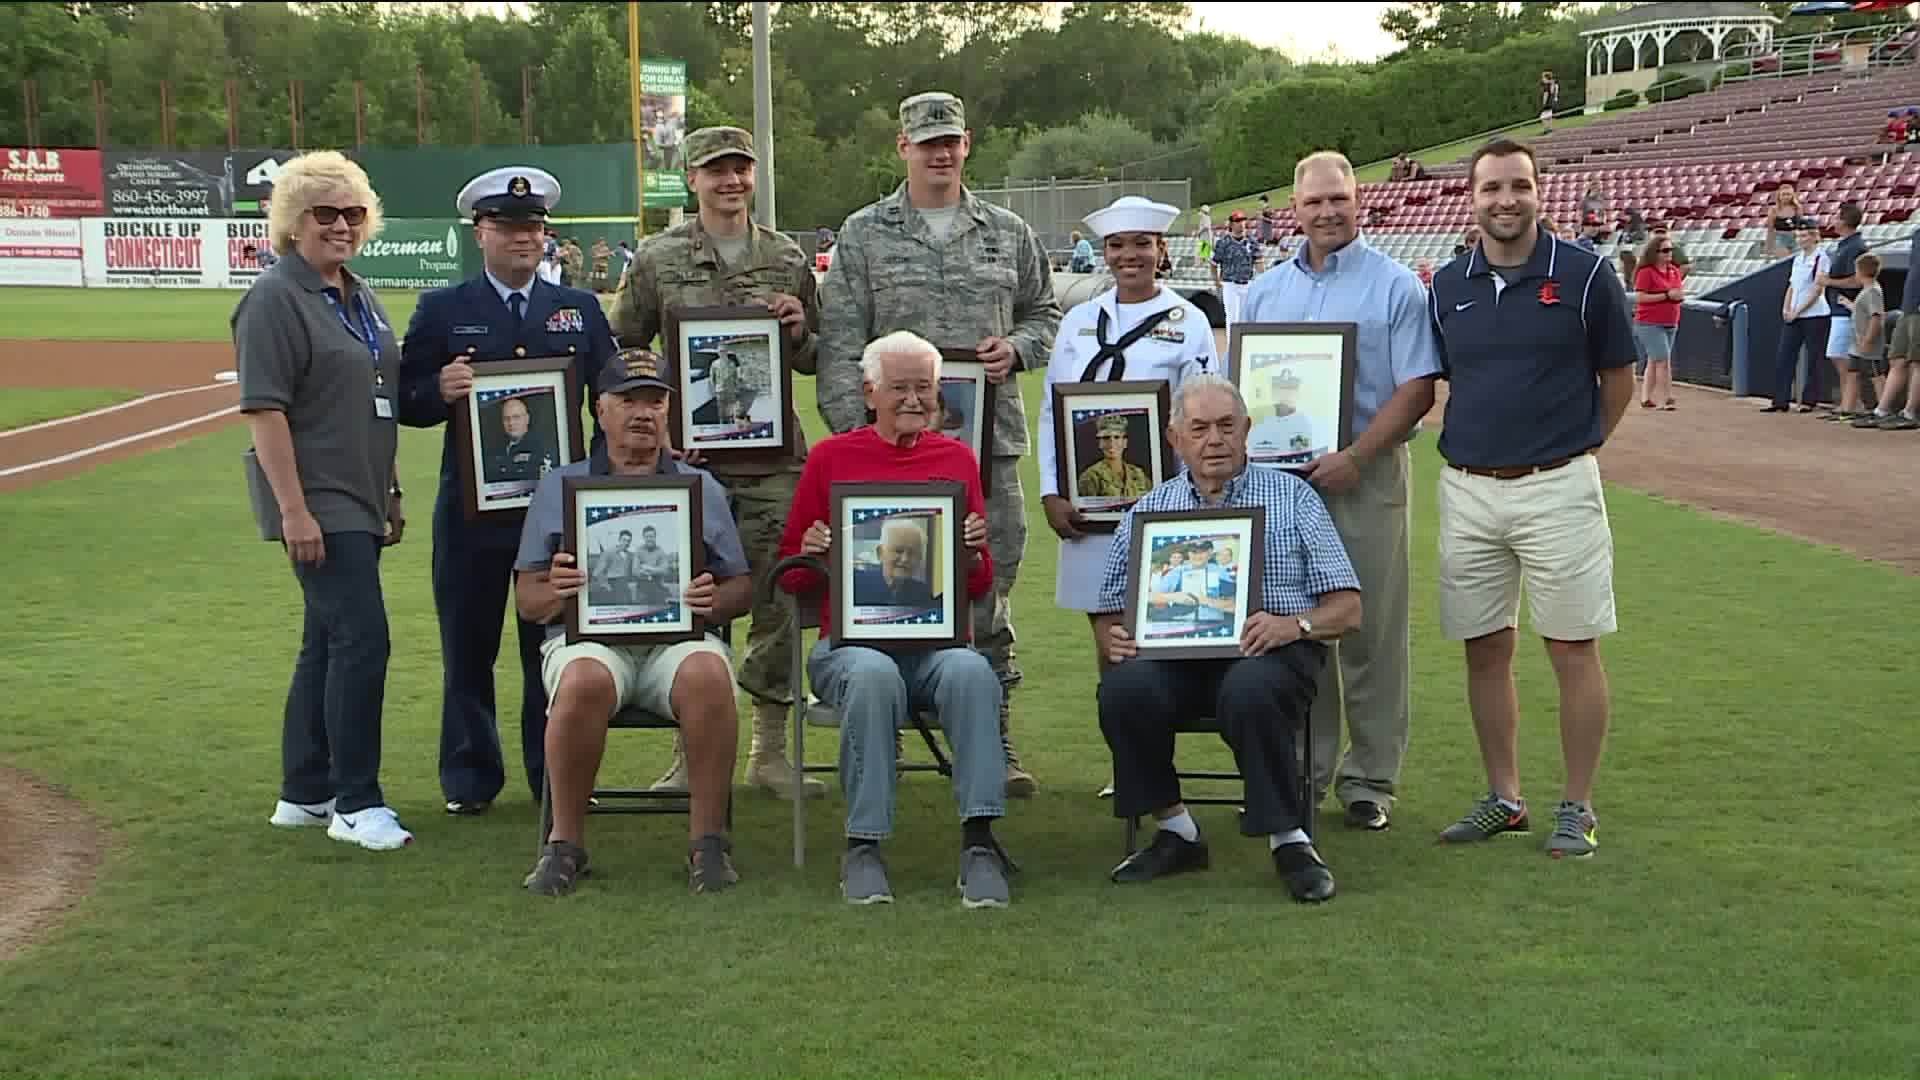 Military heroes honored at Dodd Stadium